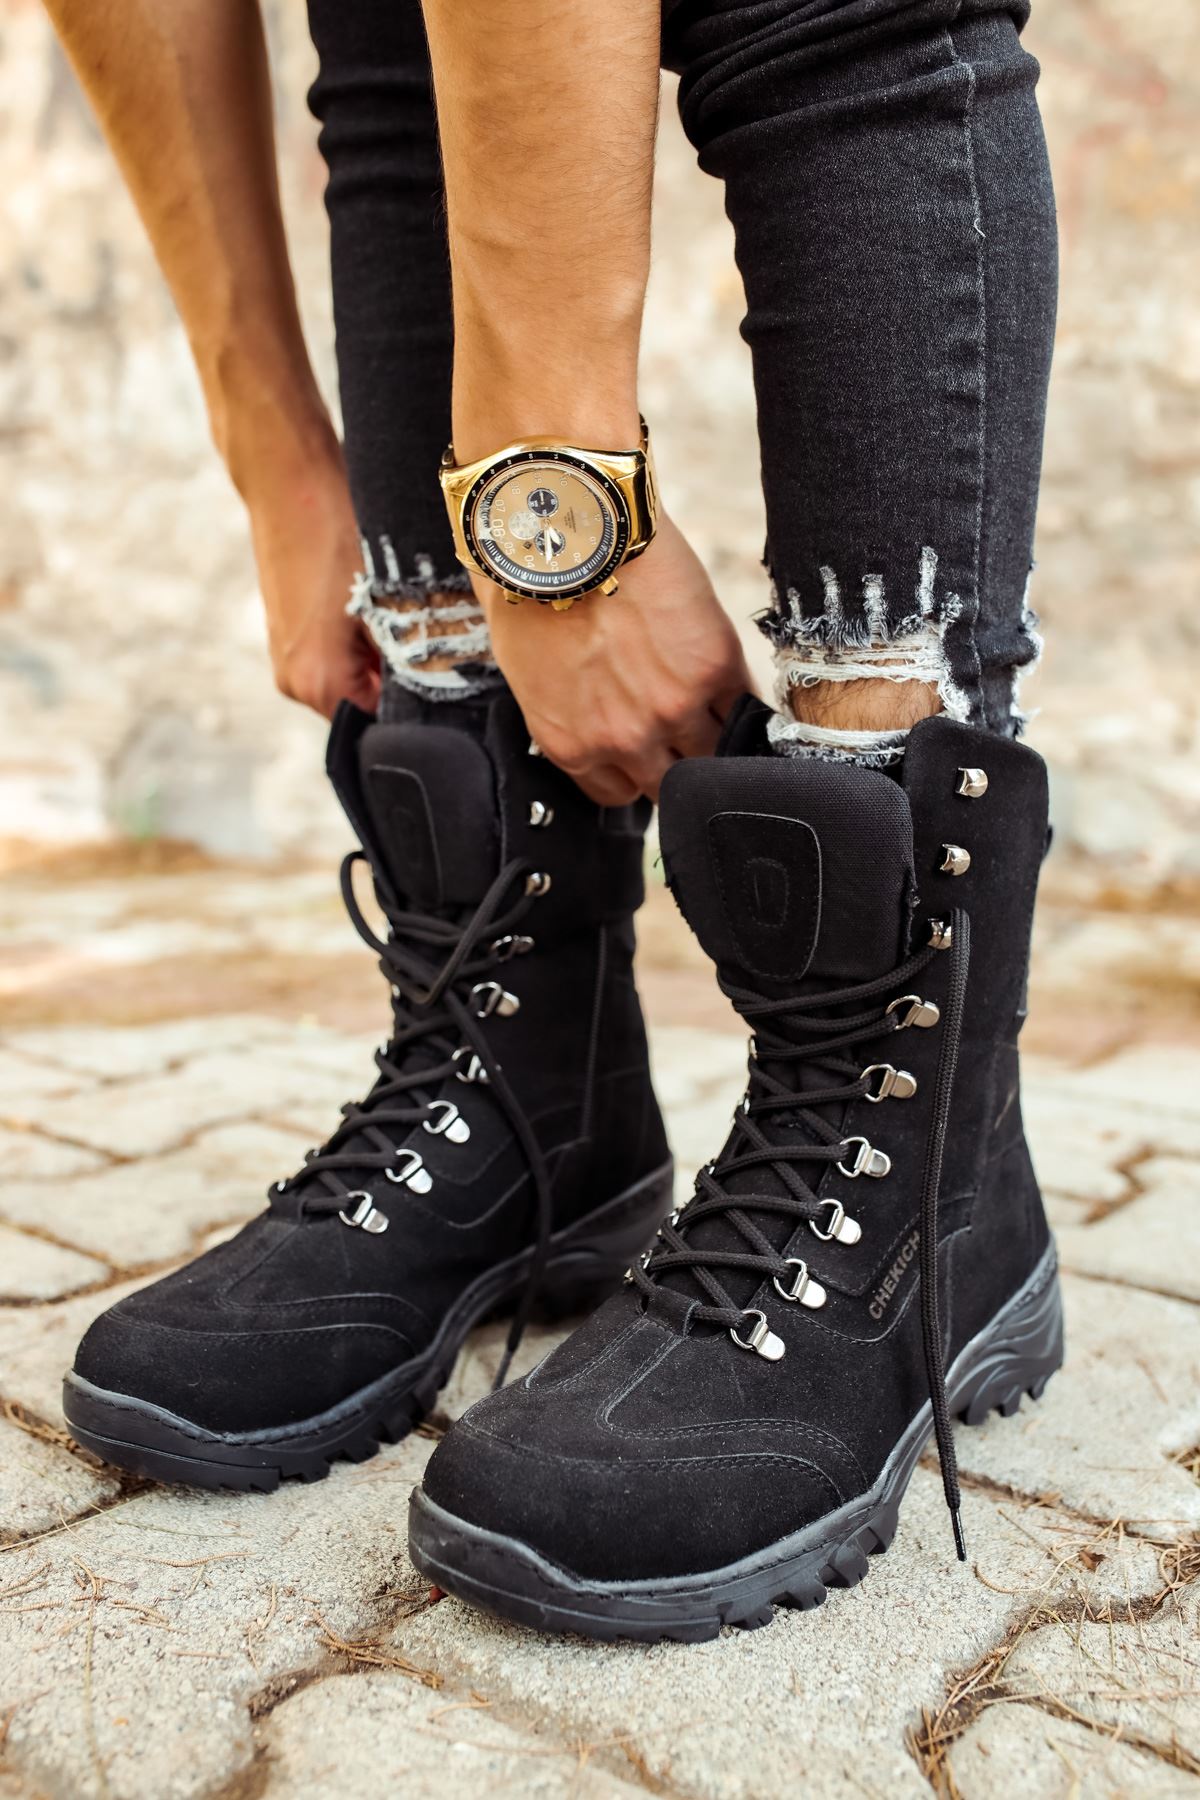 CH051 Men's Suede Black Casual Sports Sneaker Boots - STREETMODE ™